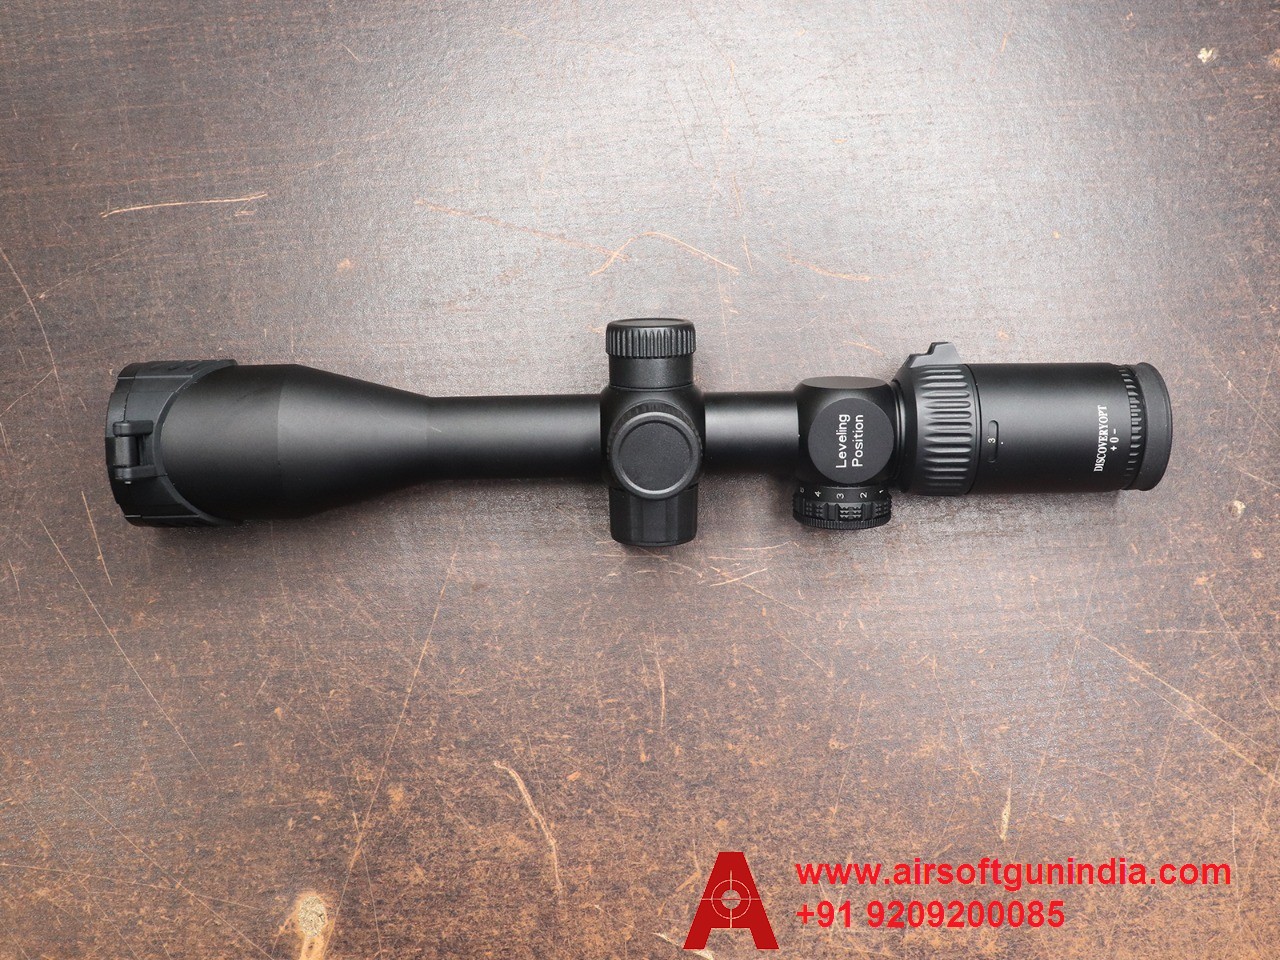 DISCOVERY OPT (VT-R 3-9X40 IRAC) Scope For Air Rifle By Airsoft Gun India